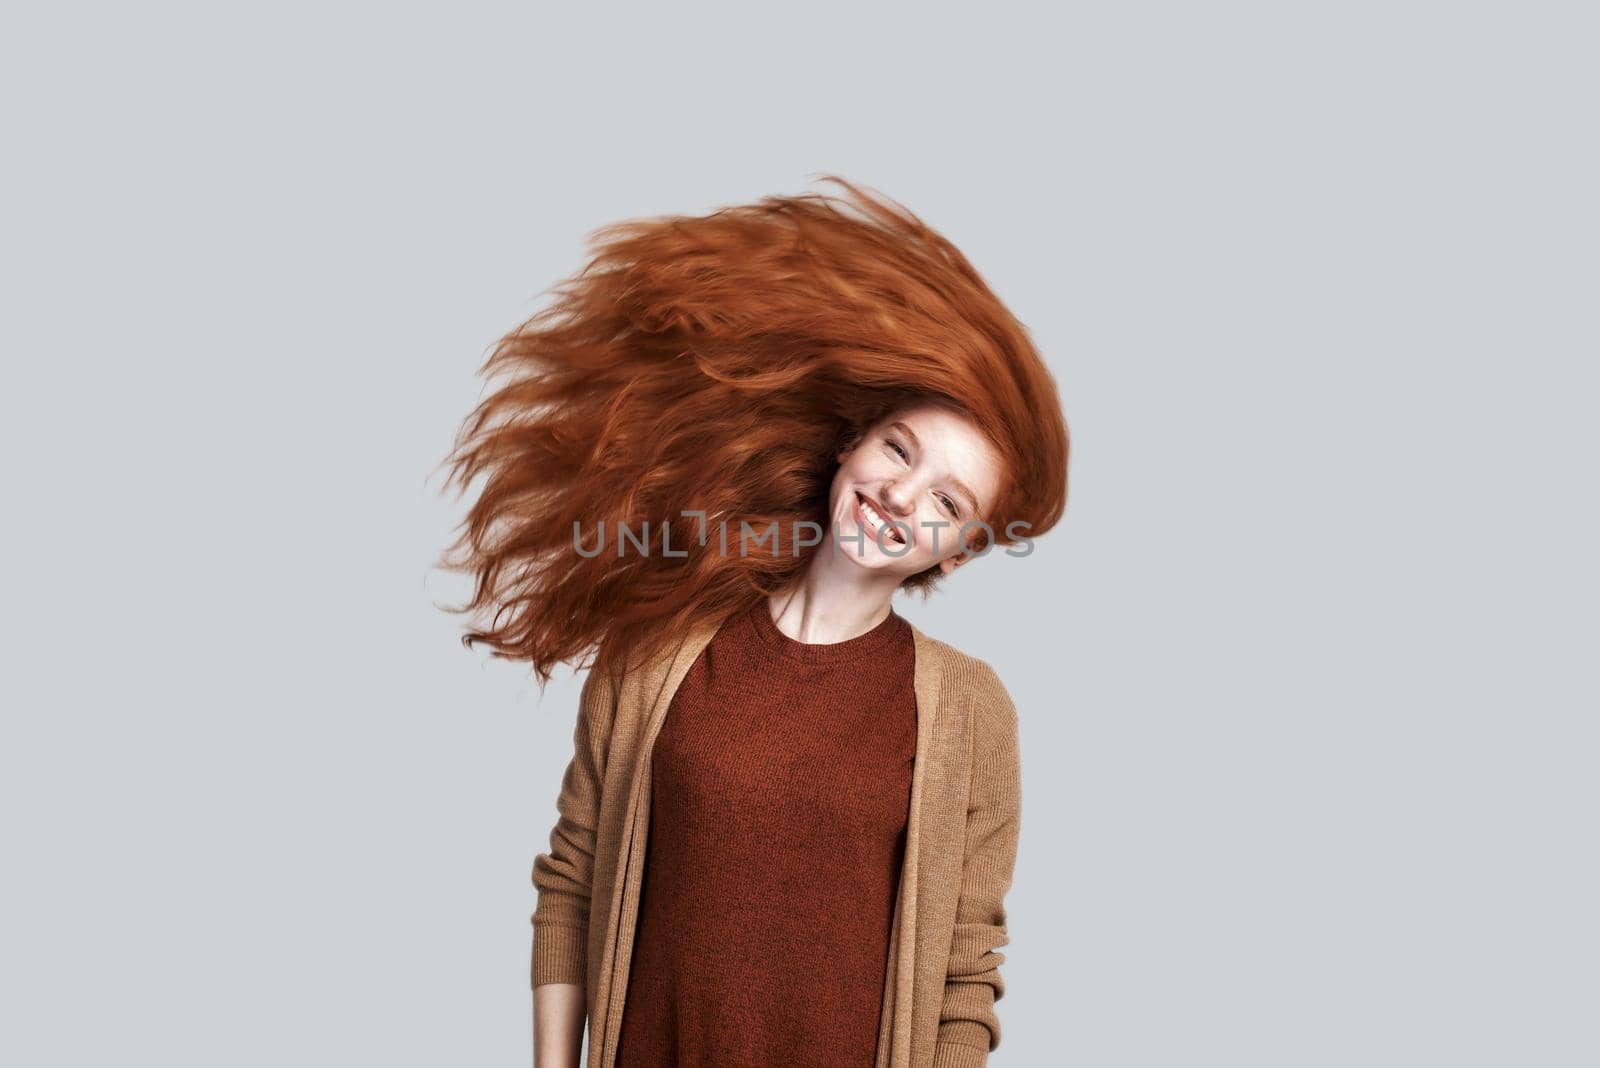 Hair like fire Portrait of cheerful and young redhead woman with tousled hair smiling at camera while standing against grey background by friendsstock